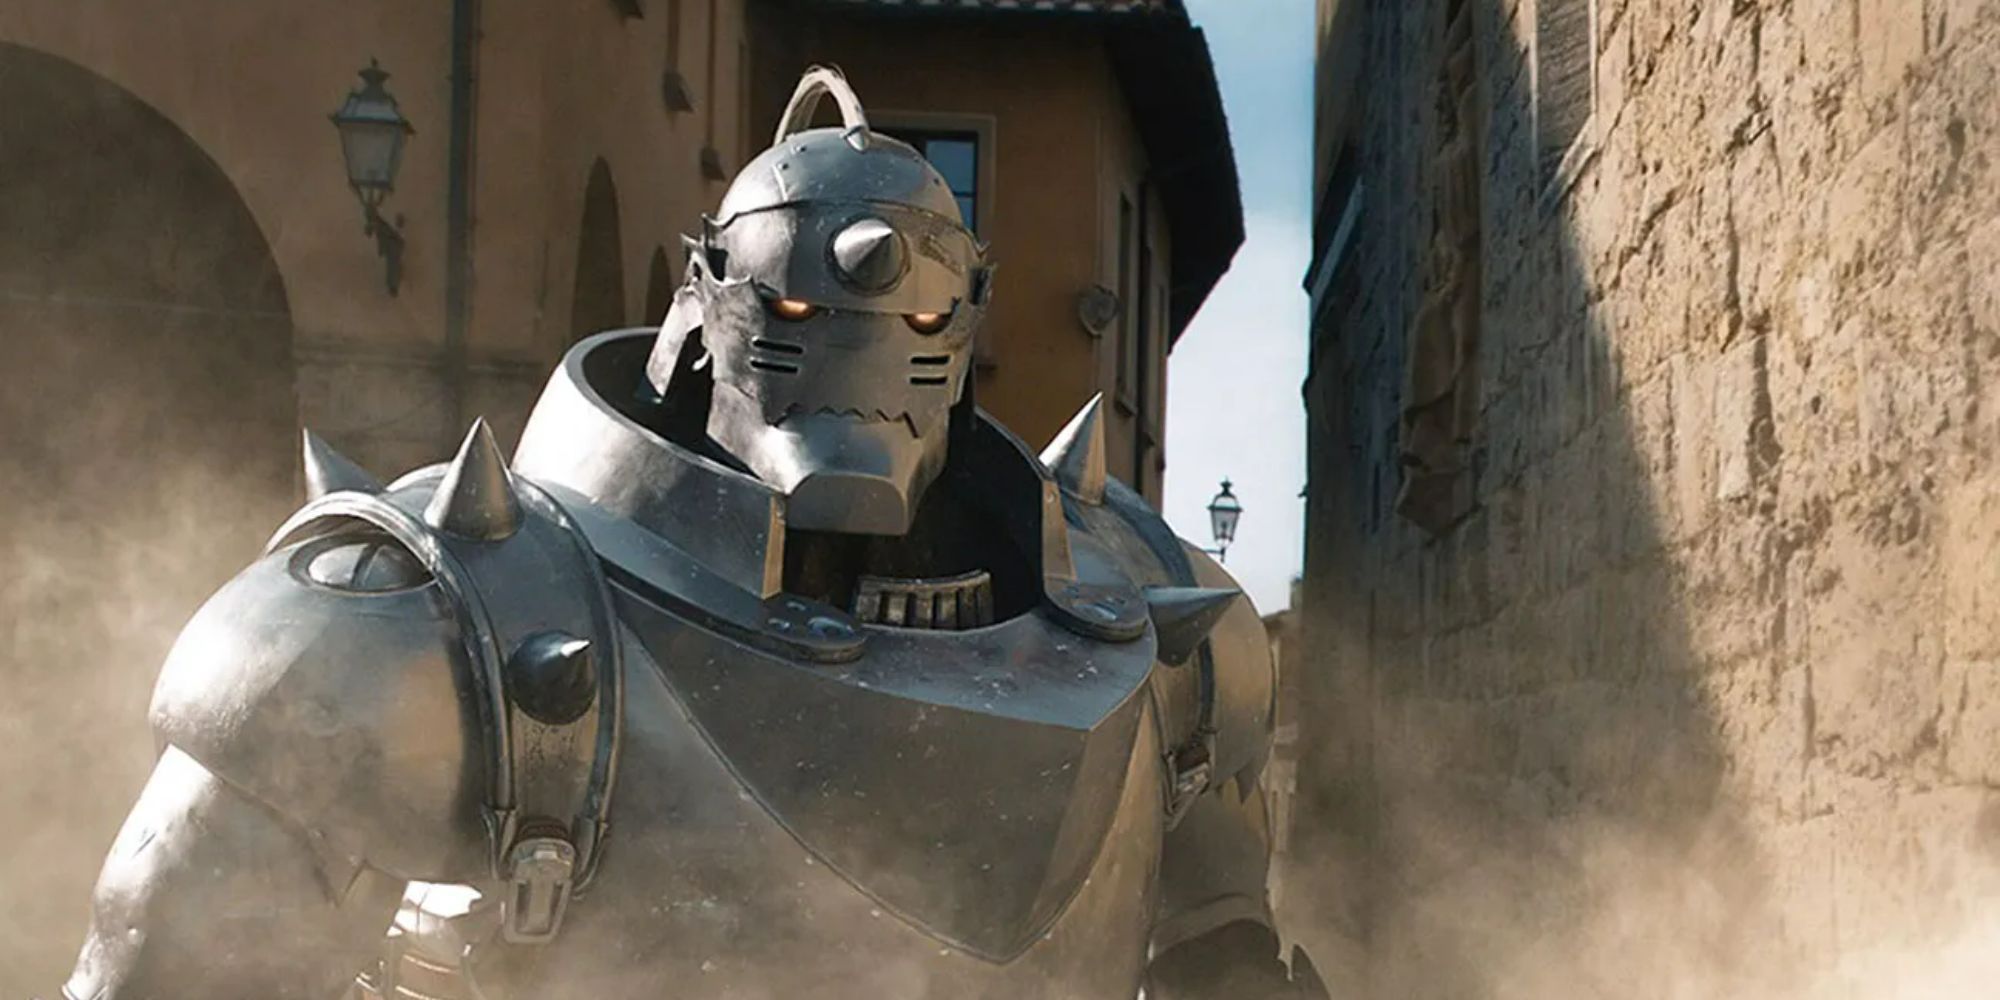 A character in full robotic armor in an alleyway next to a stone wall in the live-action Fullmetal Alchemist